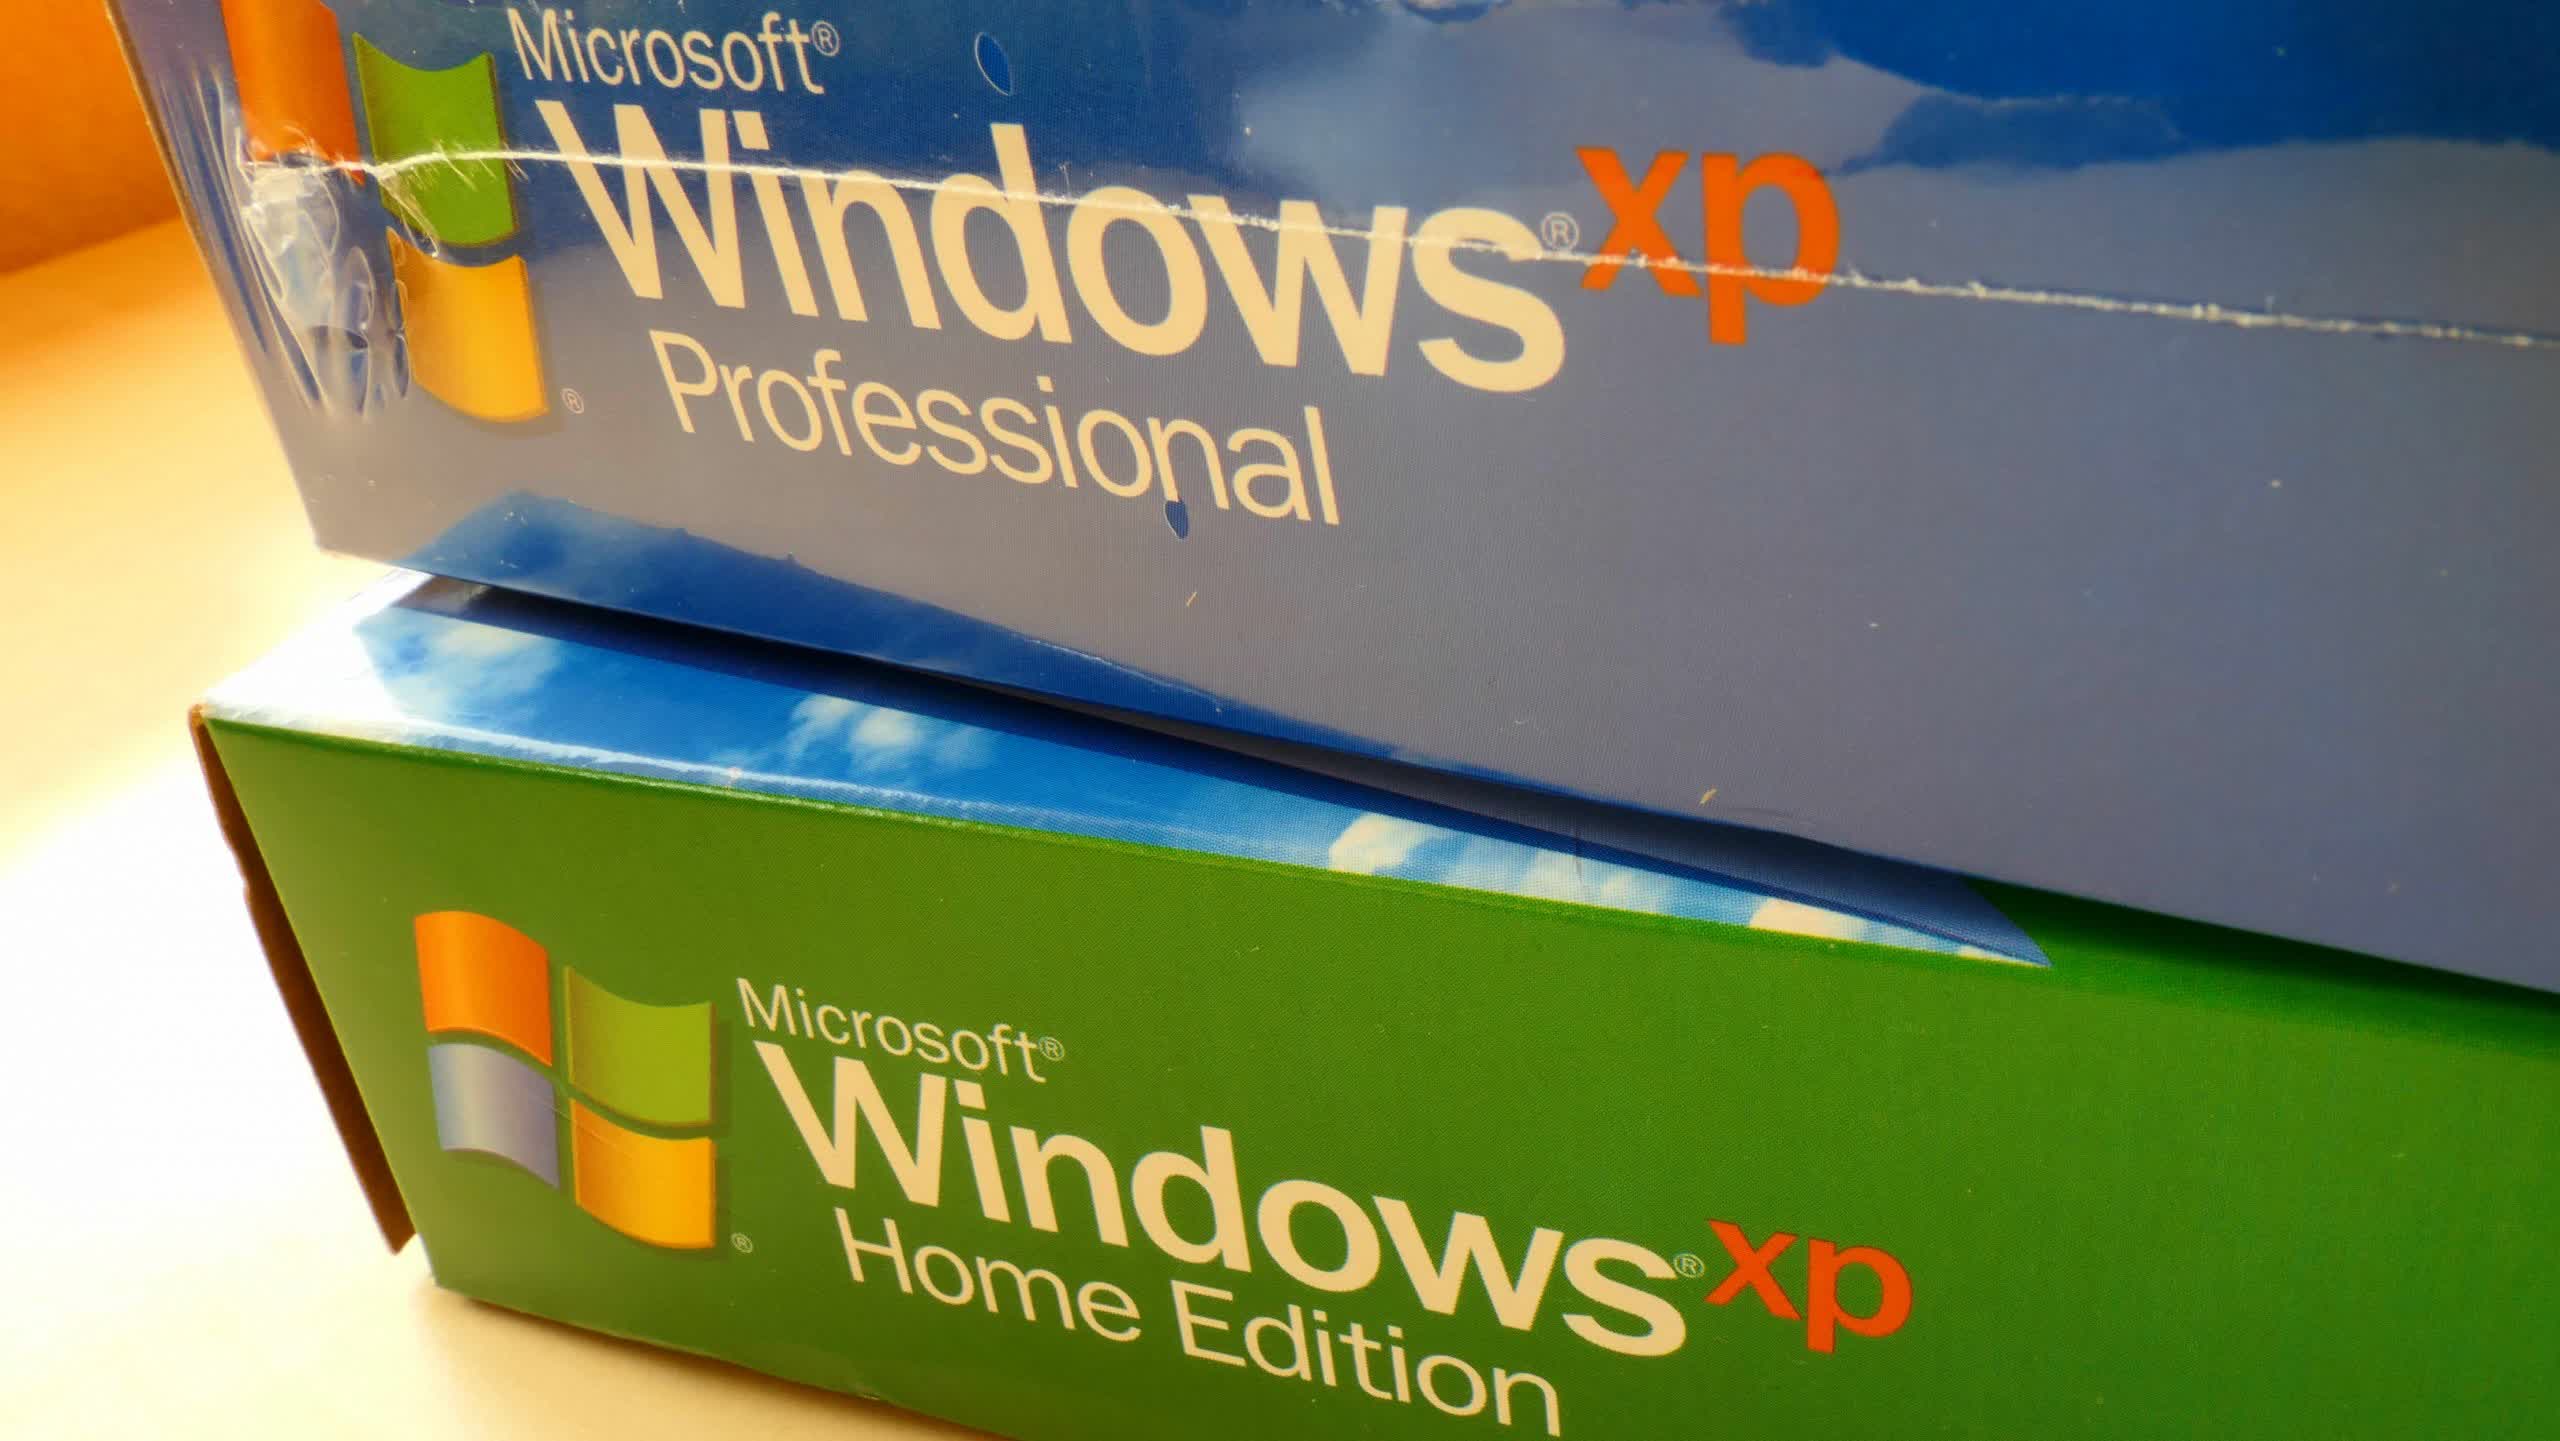 Windows XP source code has spilled out onto the internet